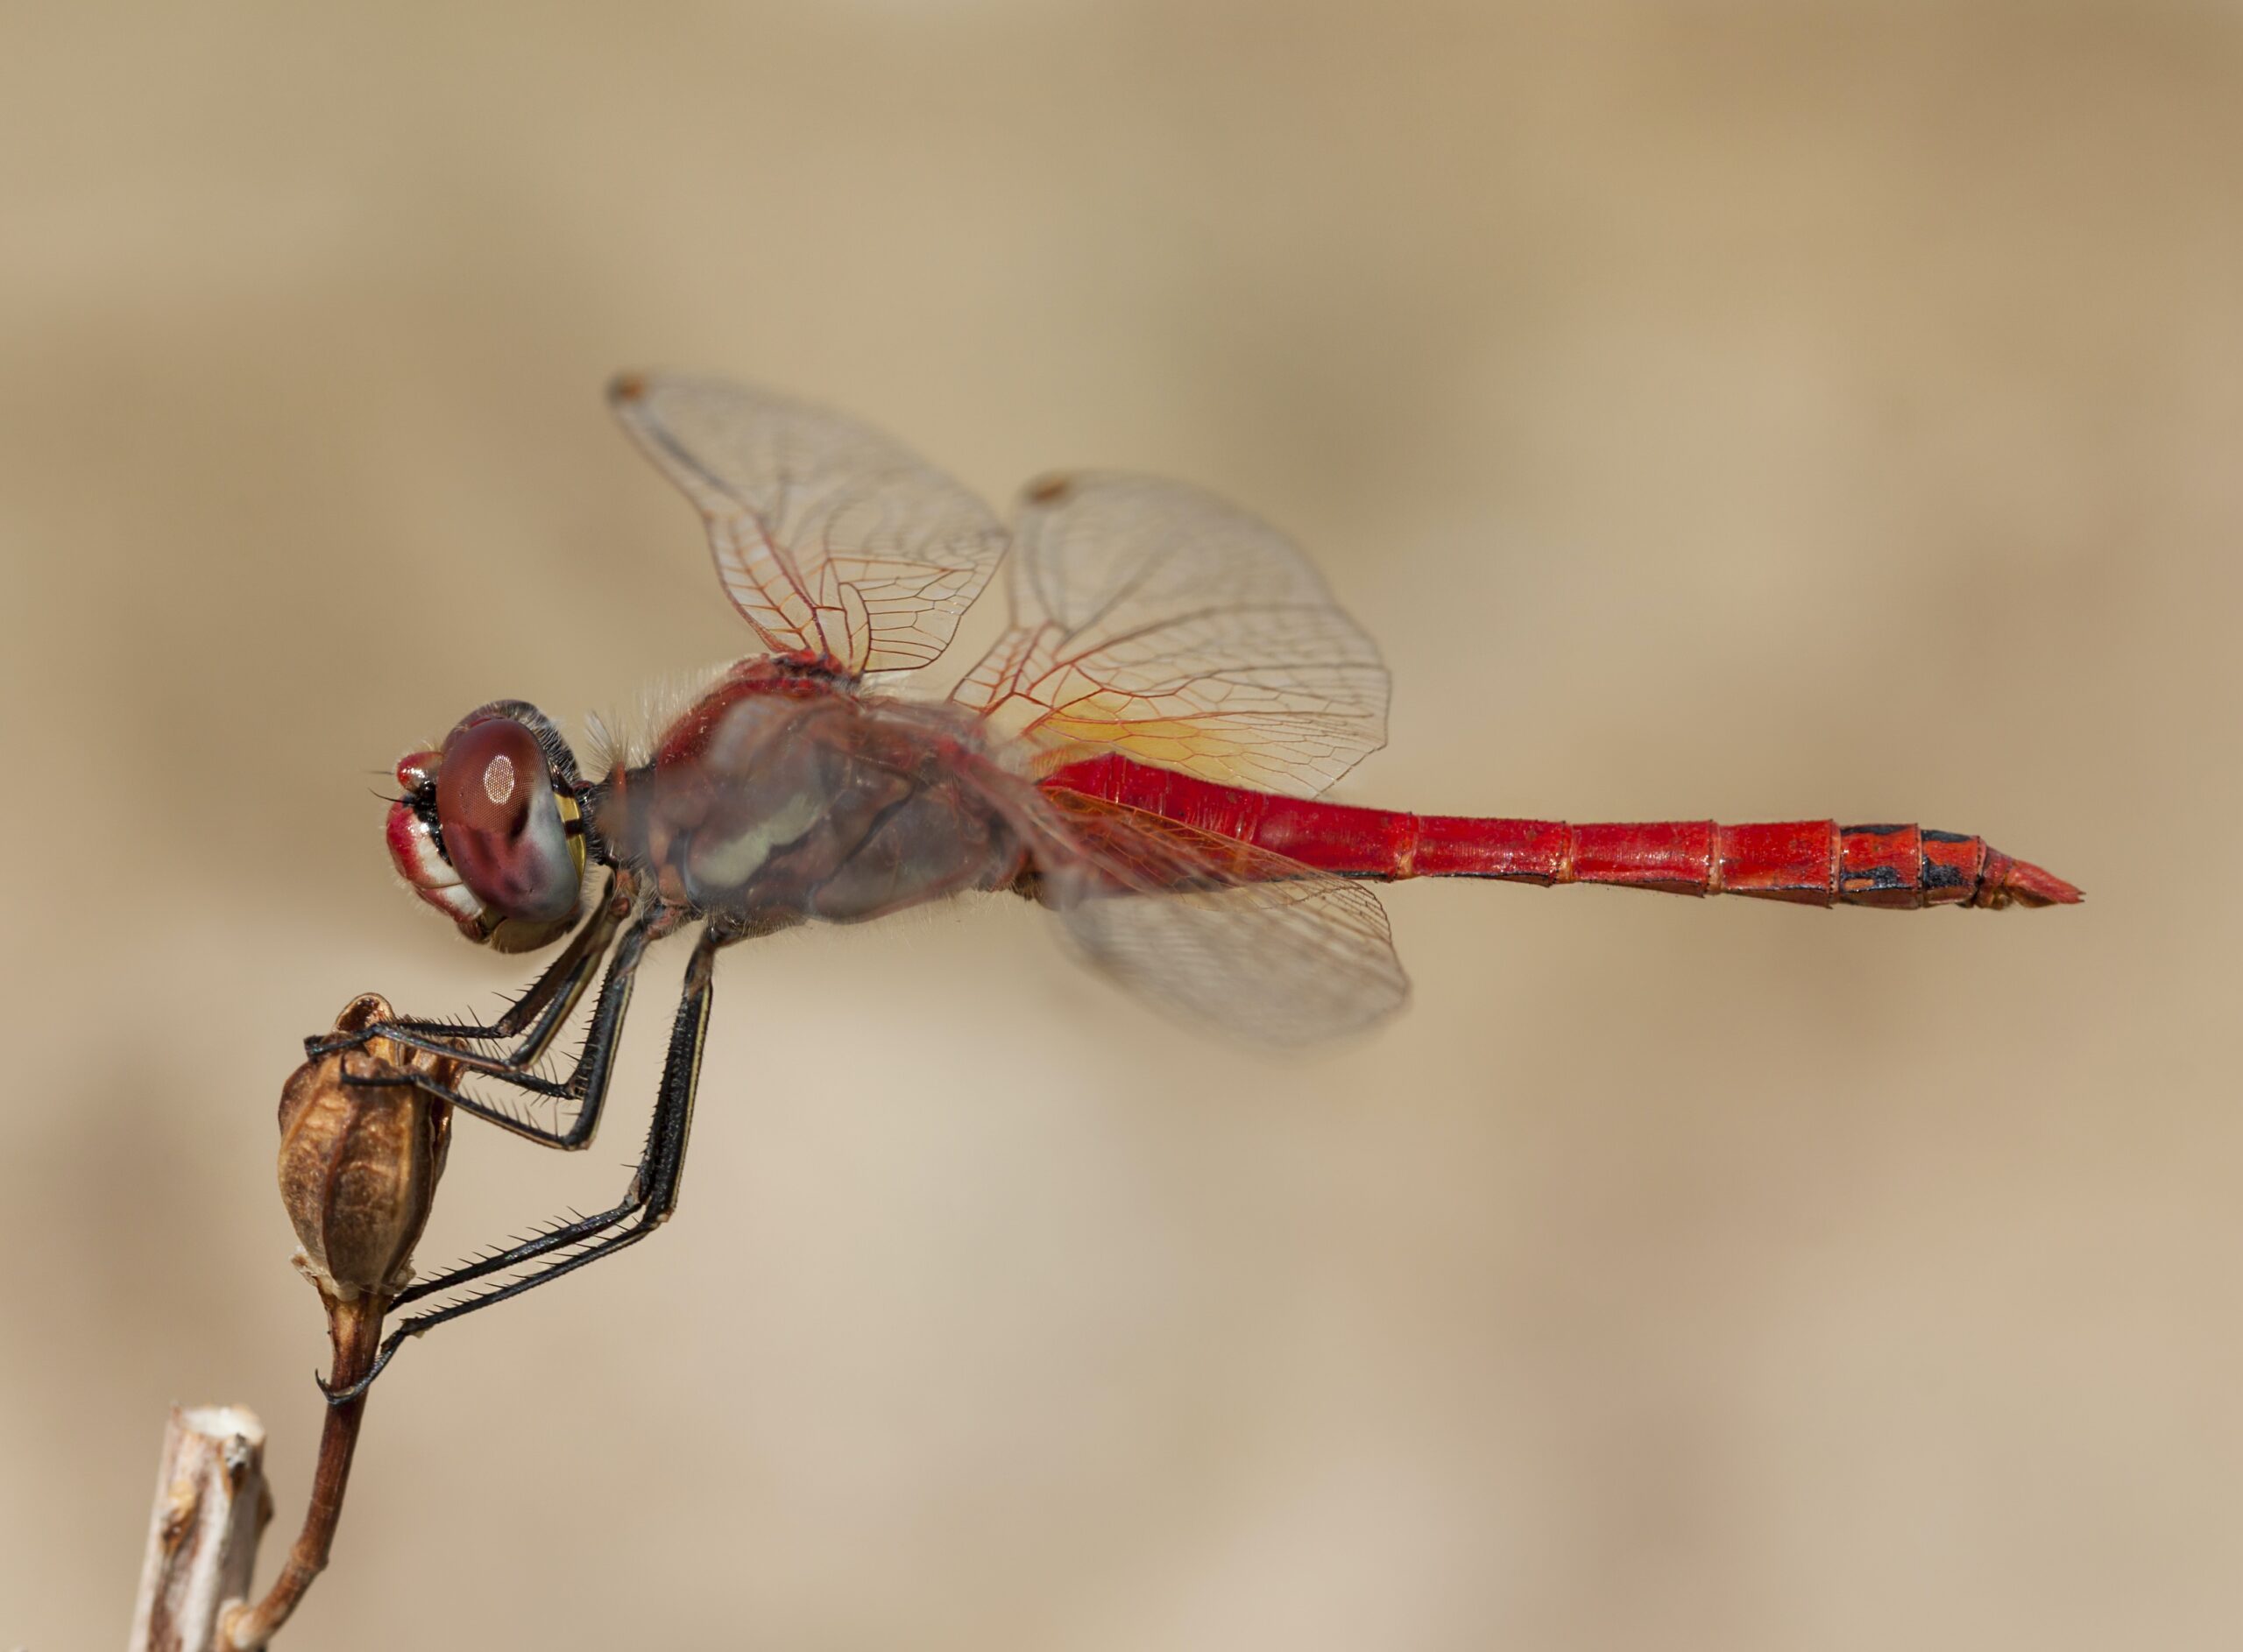 The Spiritual Meaning of a Dragonfly: Adaptability, Change, and Self-Realization